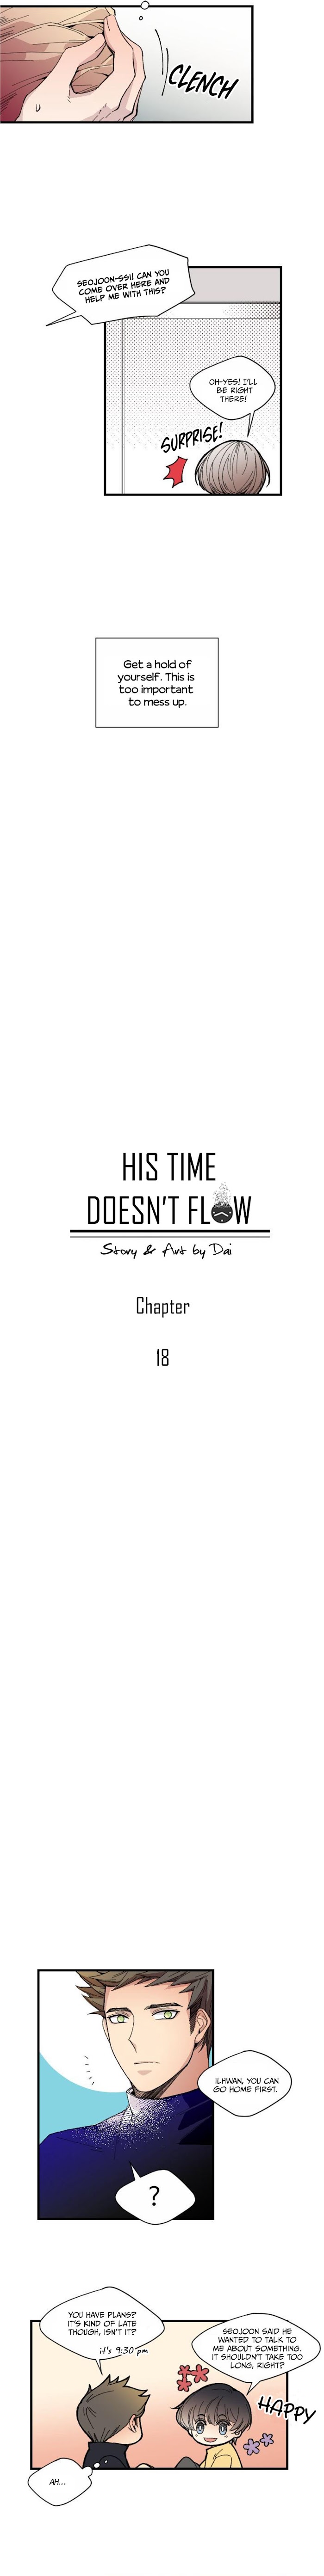 His Time Doesn't Flow - Page 4